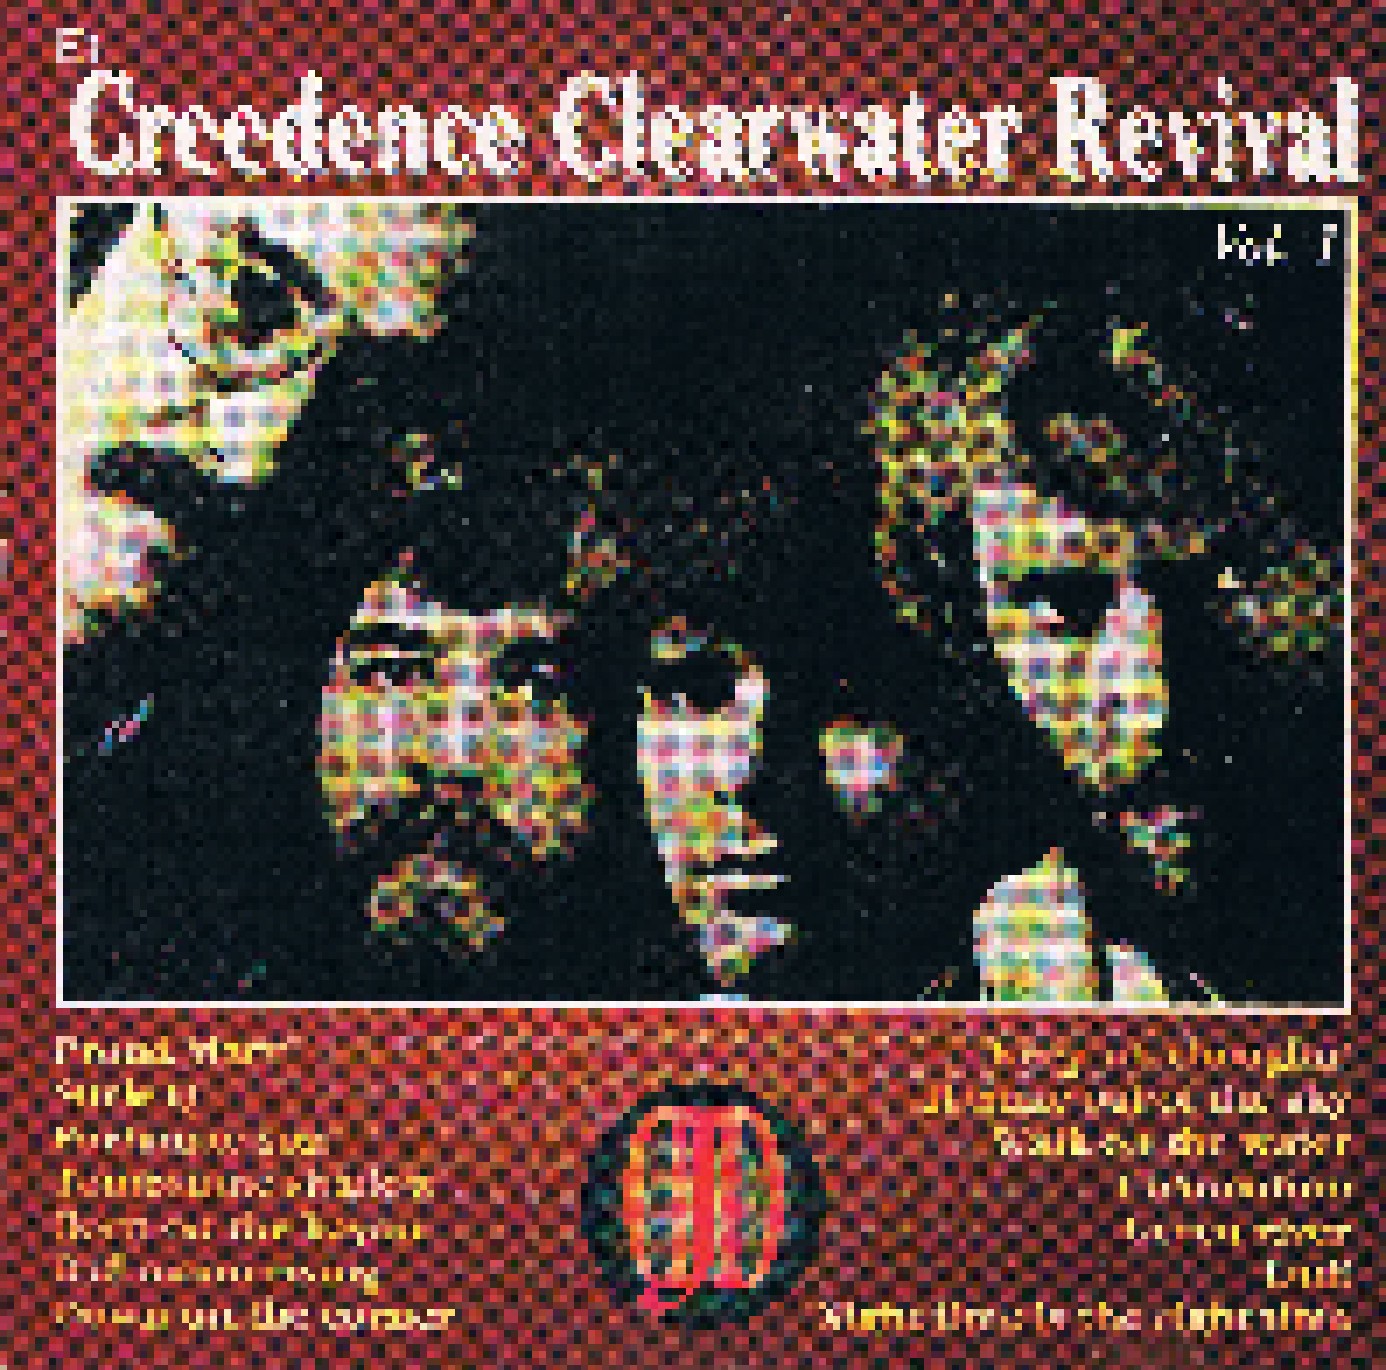 creedence clearwater revival songster wrote a song